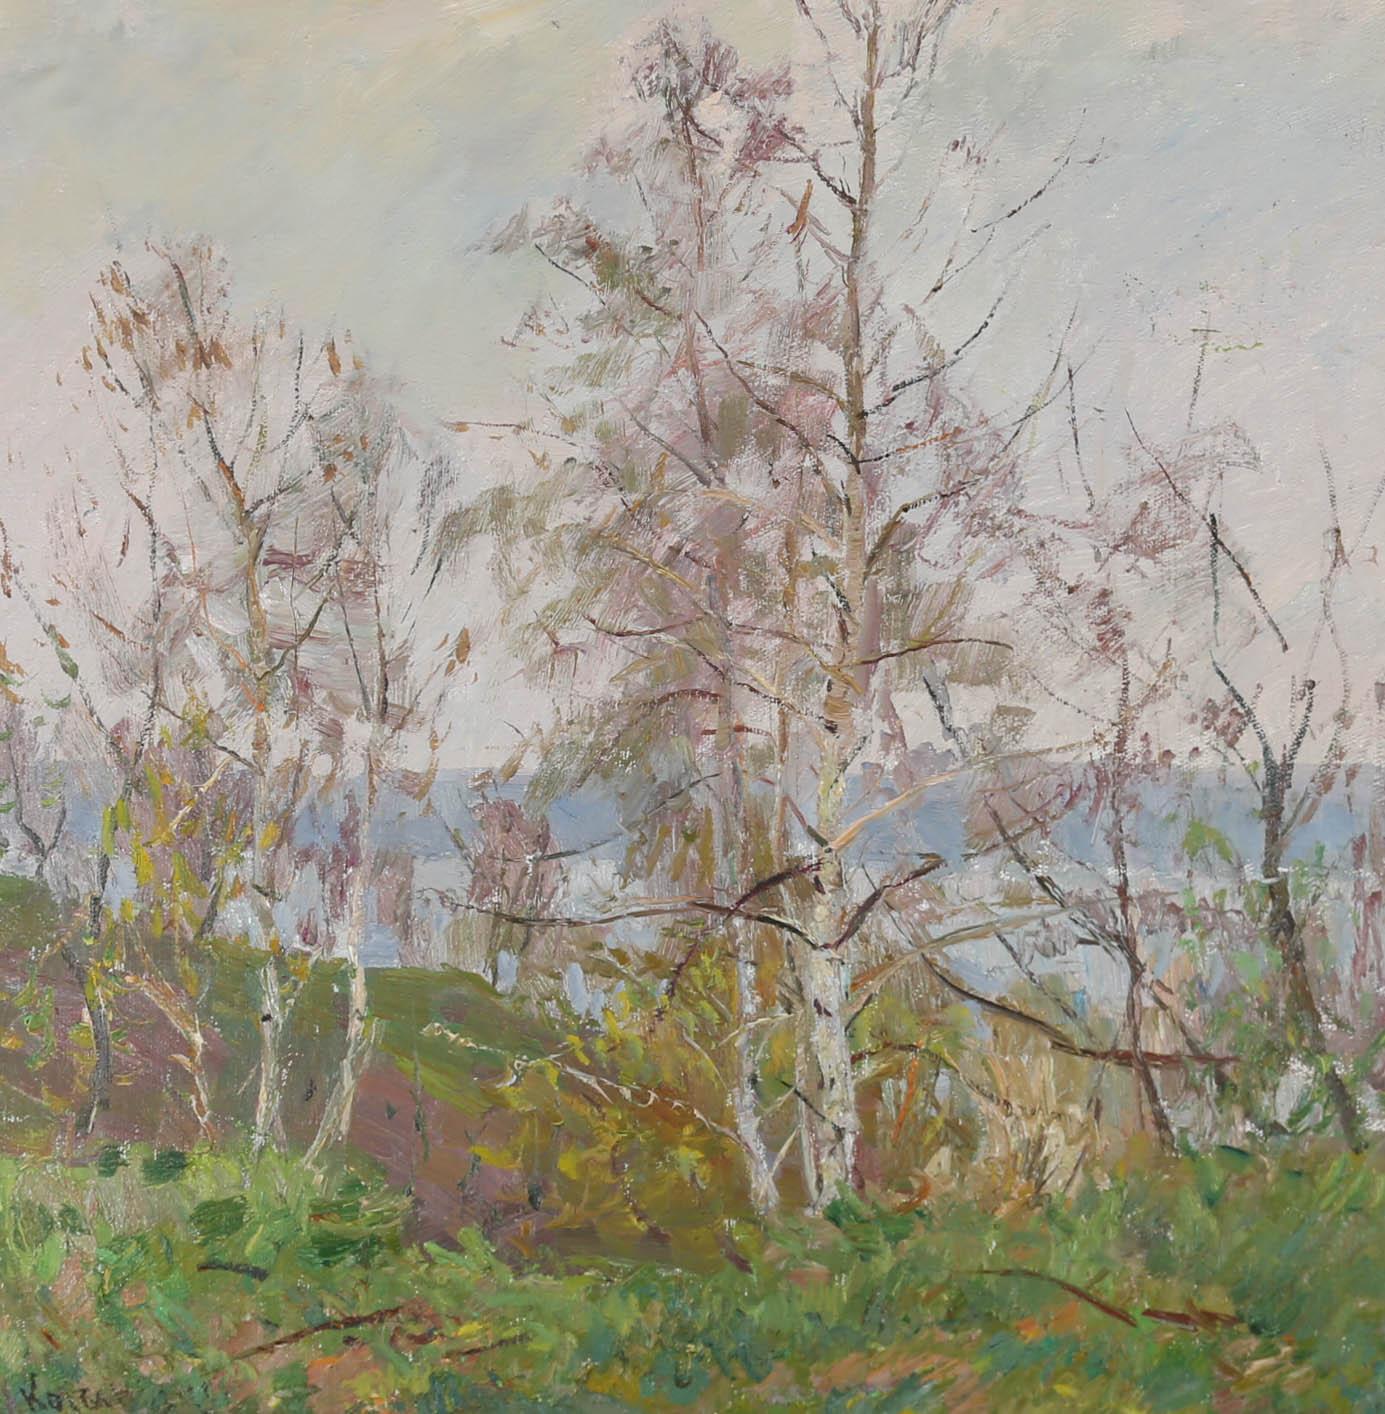 A fine example of Mid Century landscape painting, with influence from Impressionism and a more gestural and confident brush work added in the create a more contemporary take on en plein air painting. The scene shows a line of stark silver birch